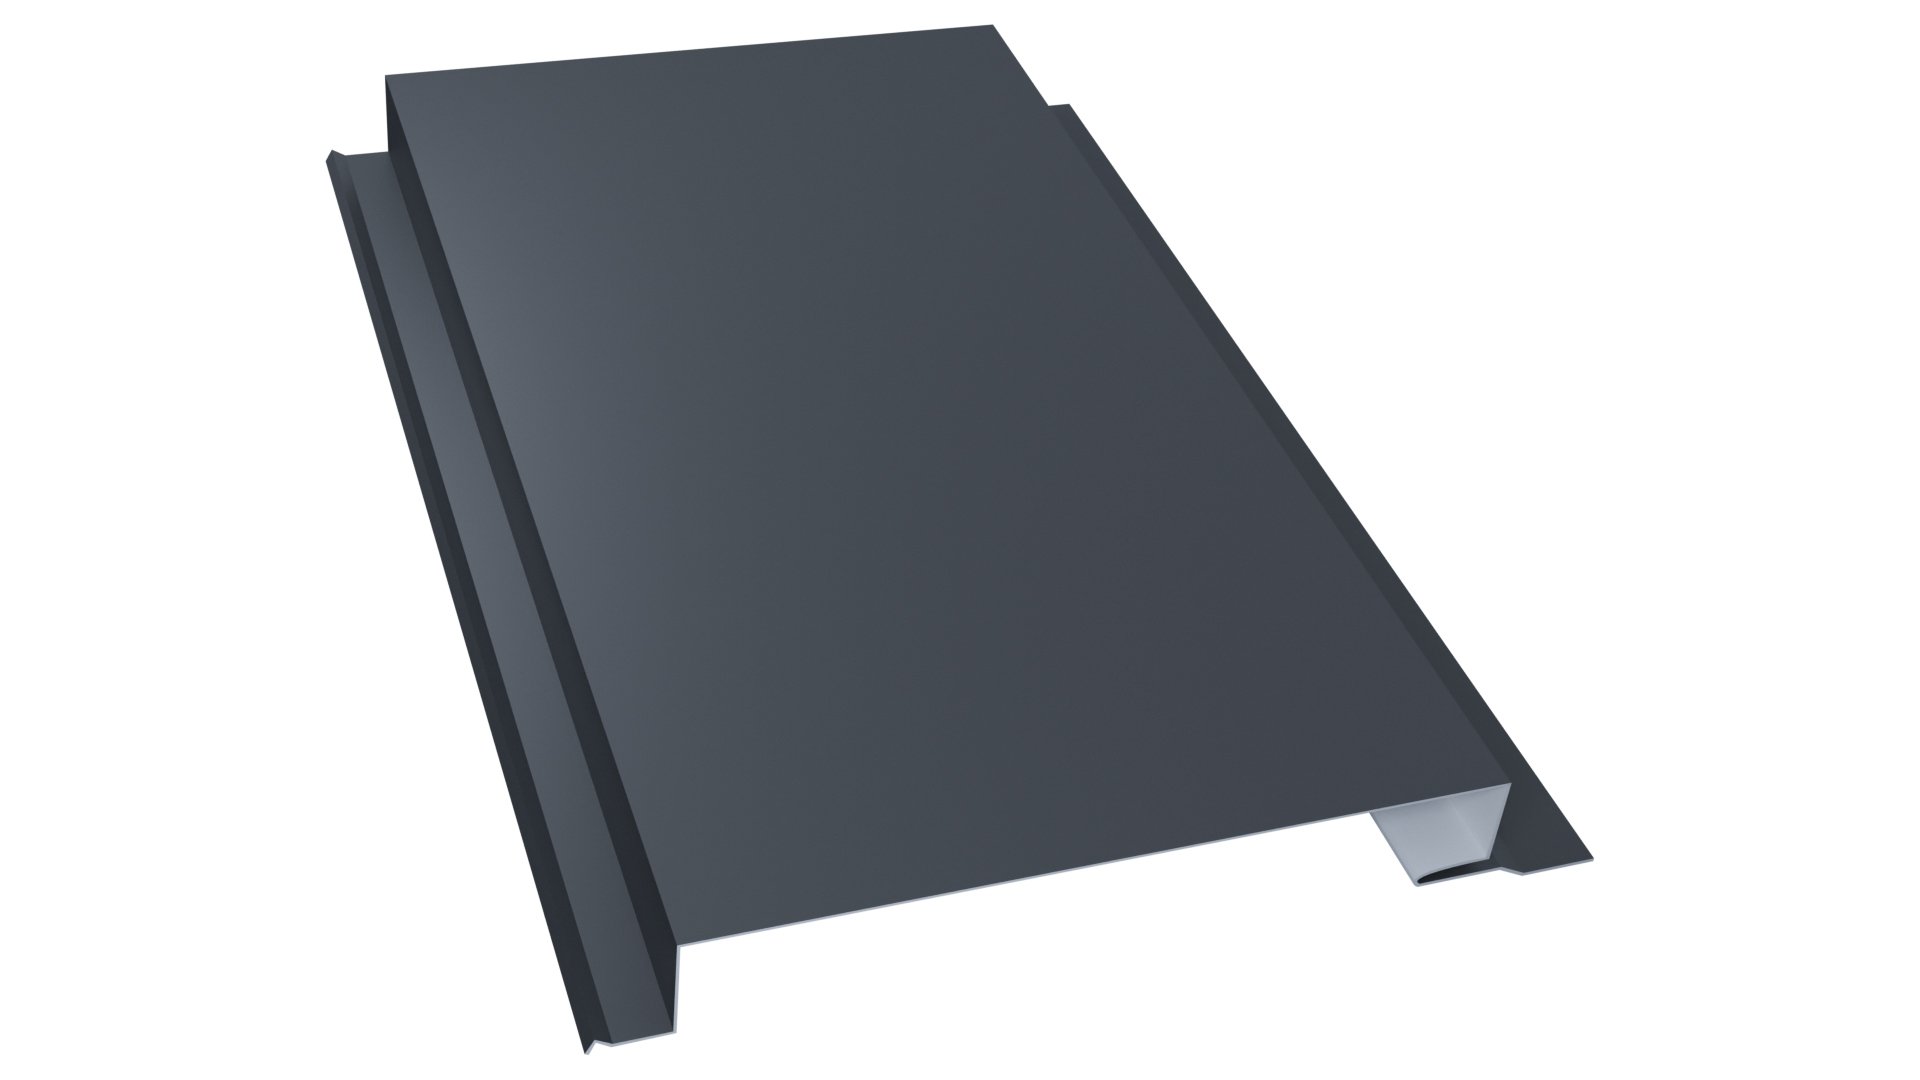 Never Seen Before Metal Siding Panels With Very Narrow Face Board Coverages Has Been Released By Popular Manufacturerst Title Here...